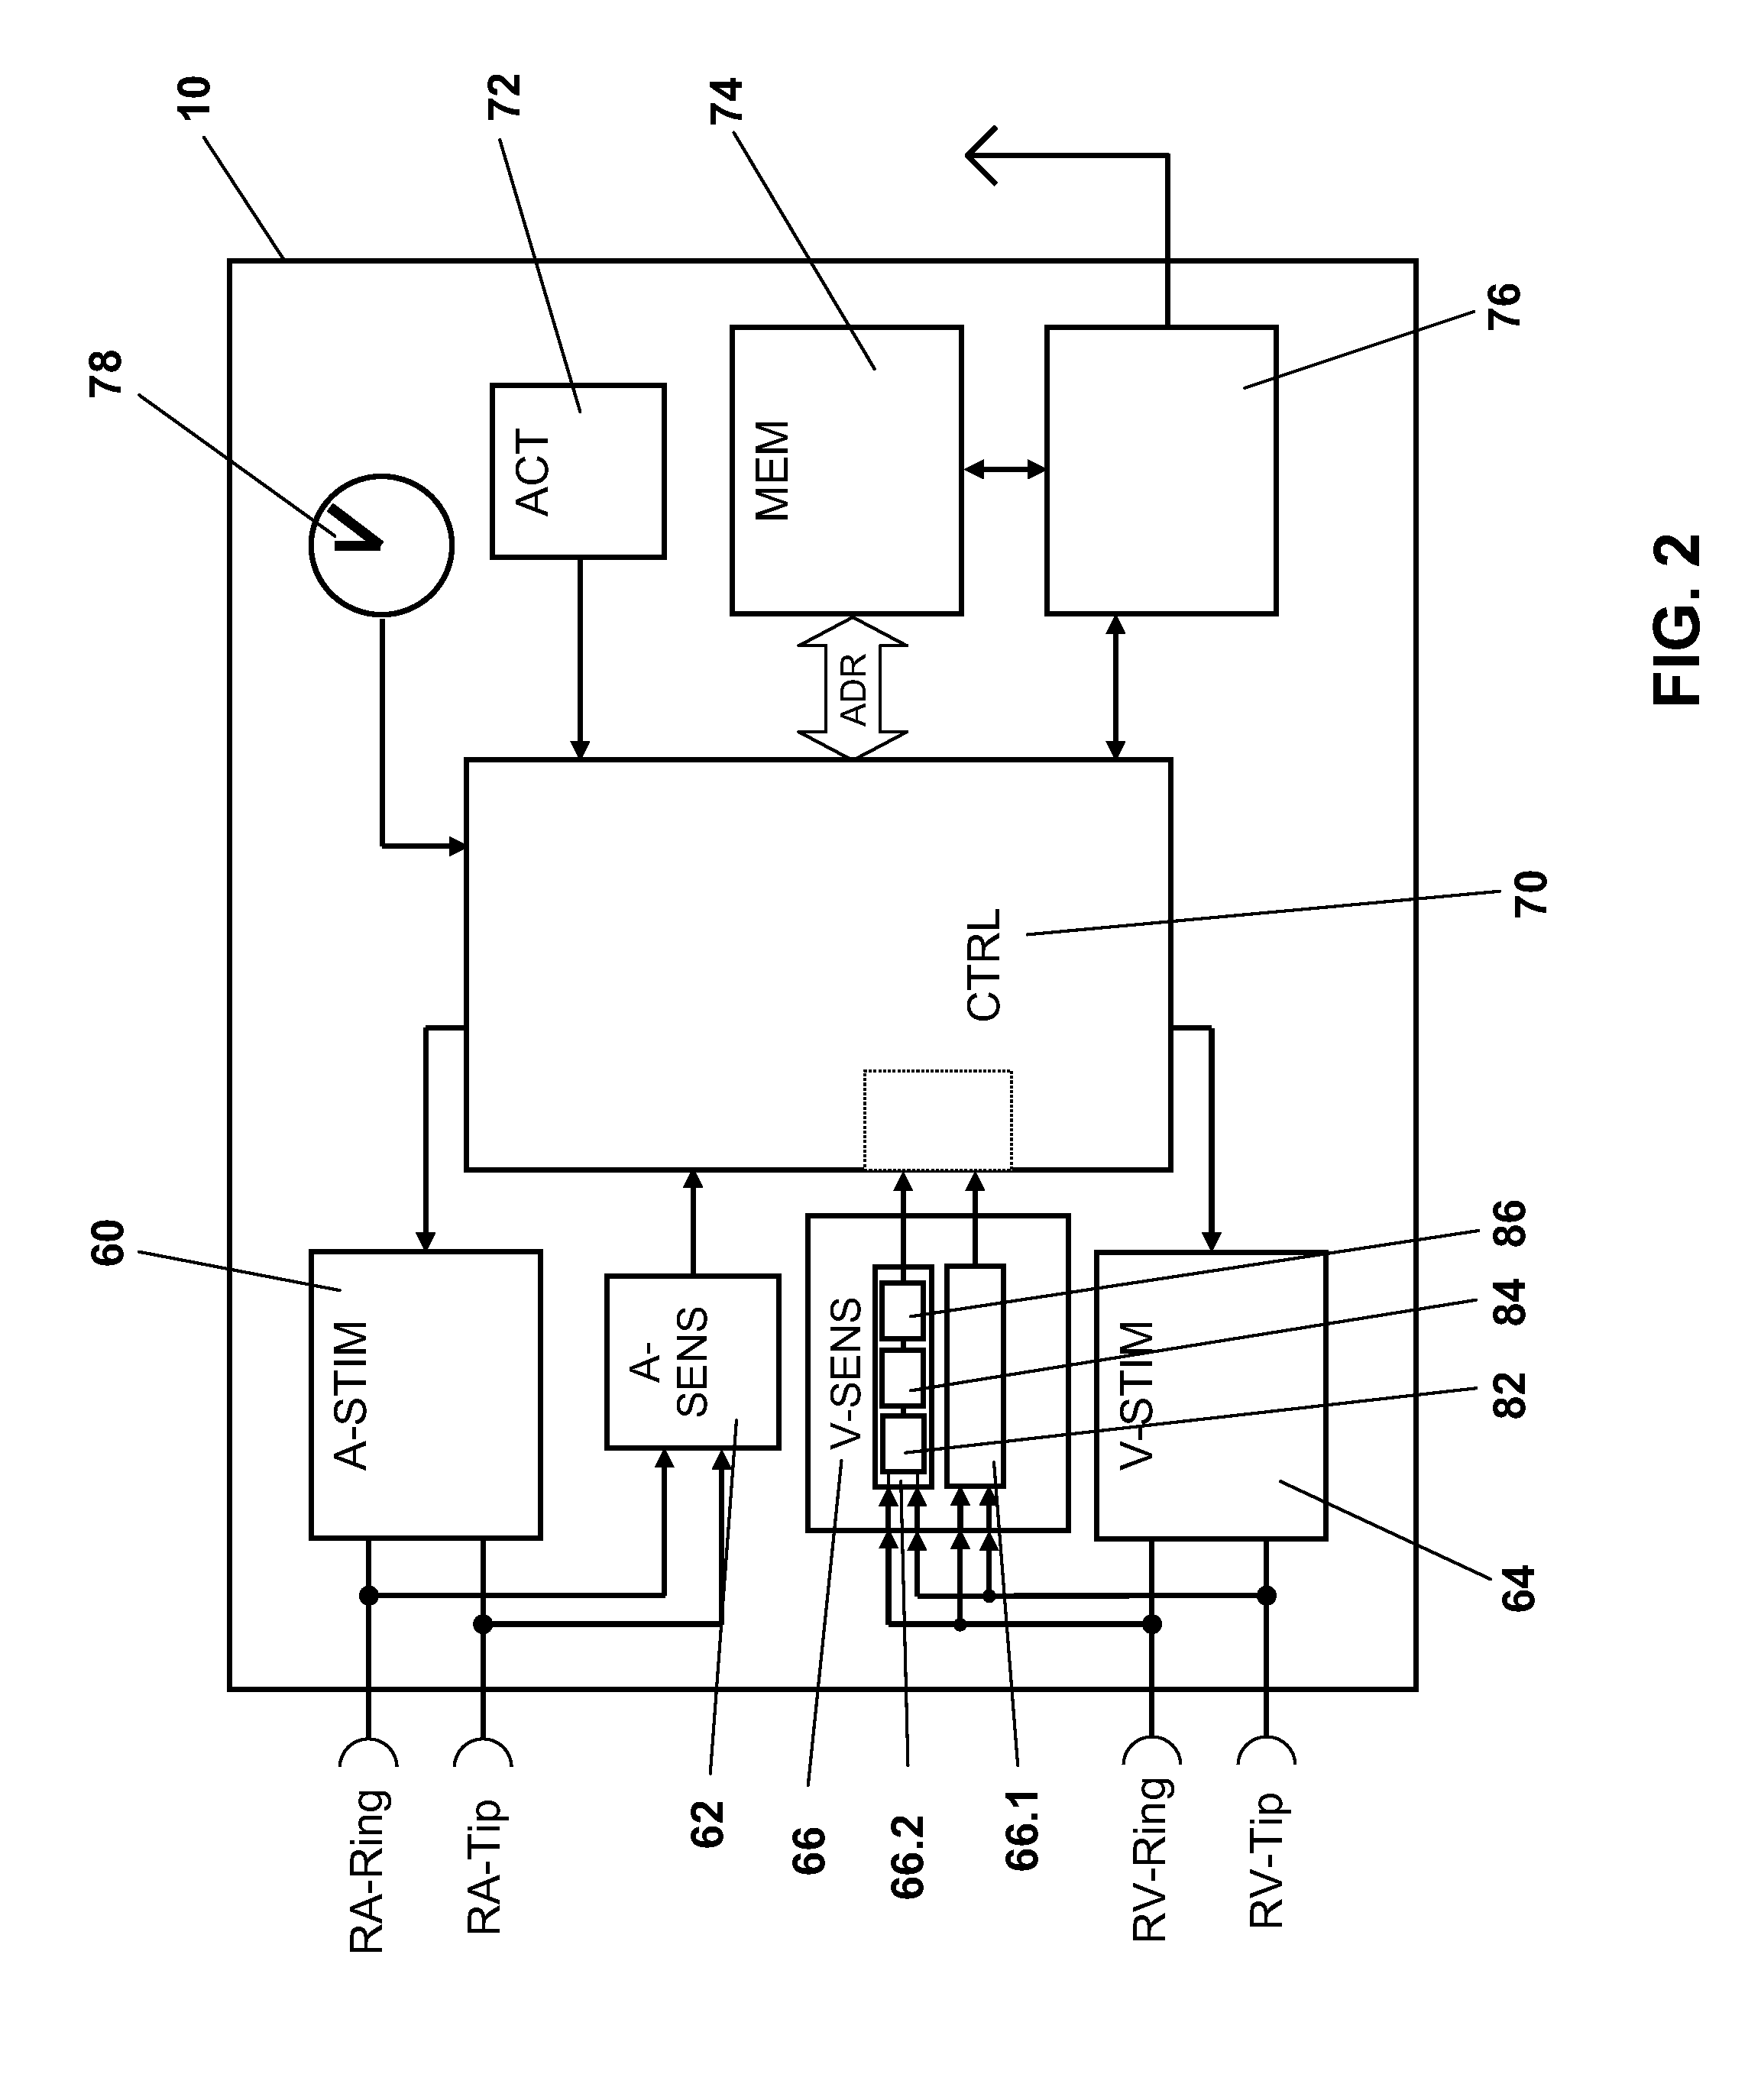 Technique for determining signal quality in a physiologic sensing system using high frequency sampling